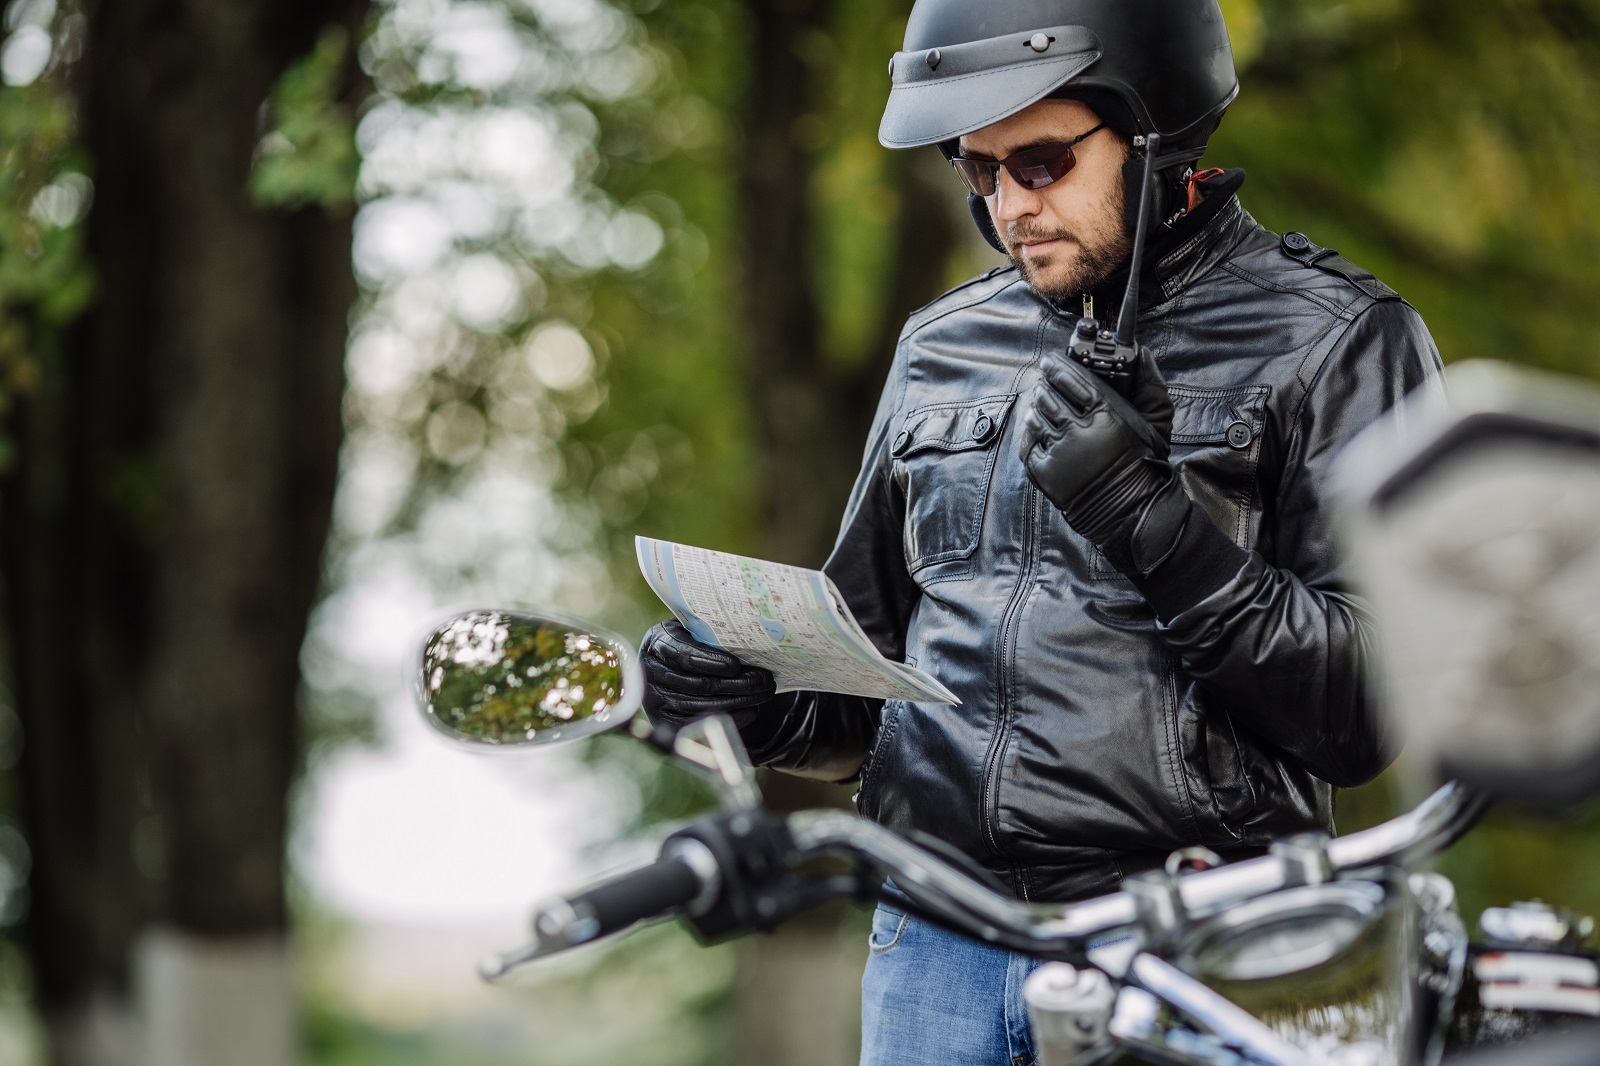 <p class="wp-caption-text">Image Credit: Shutterstock / PRESSLAB</p>  <p><span>A GPS device or a detailed map ensures you don’t get lost, especially on long trips. Many modern GPS devices are designed specifically for motorcycle use and are waterproof and vibration-resistant.</span></p>